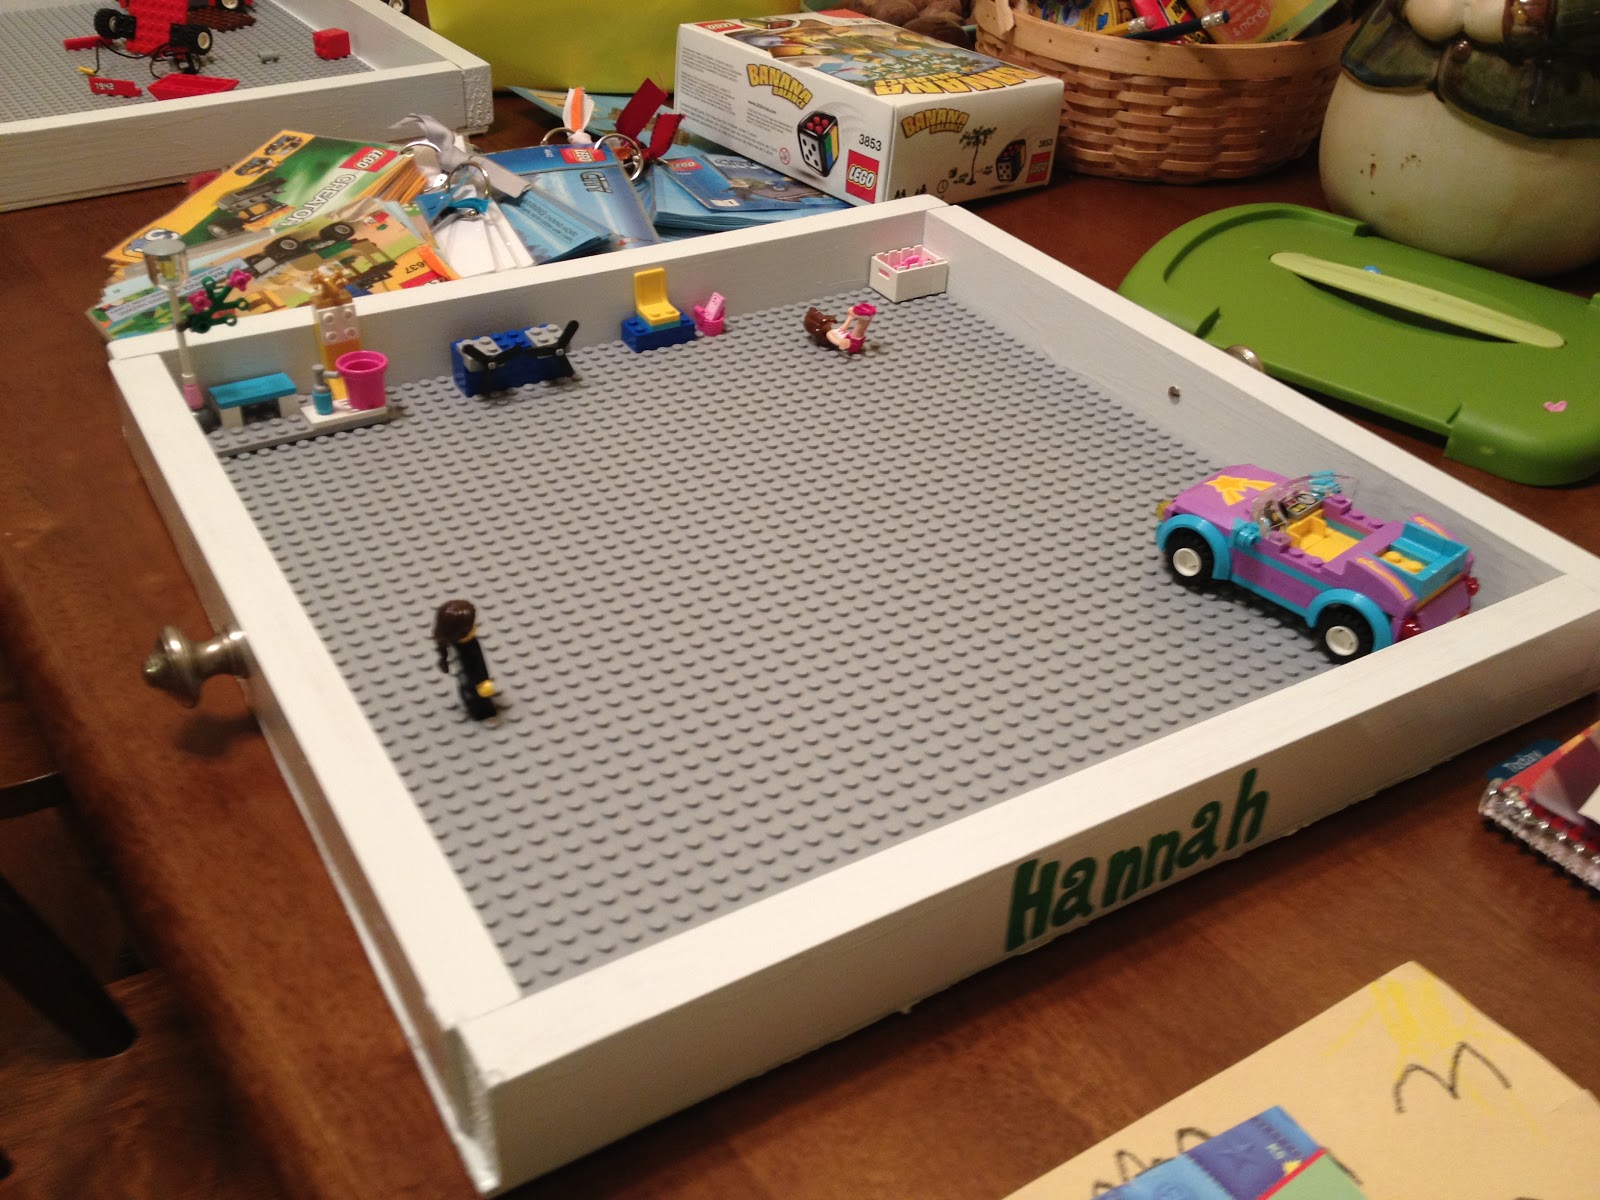 Give Peas a Chance: Under Bed Lego Tray